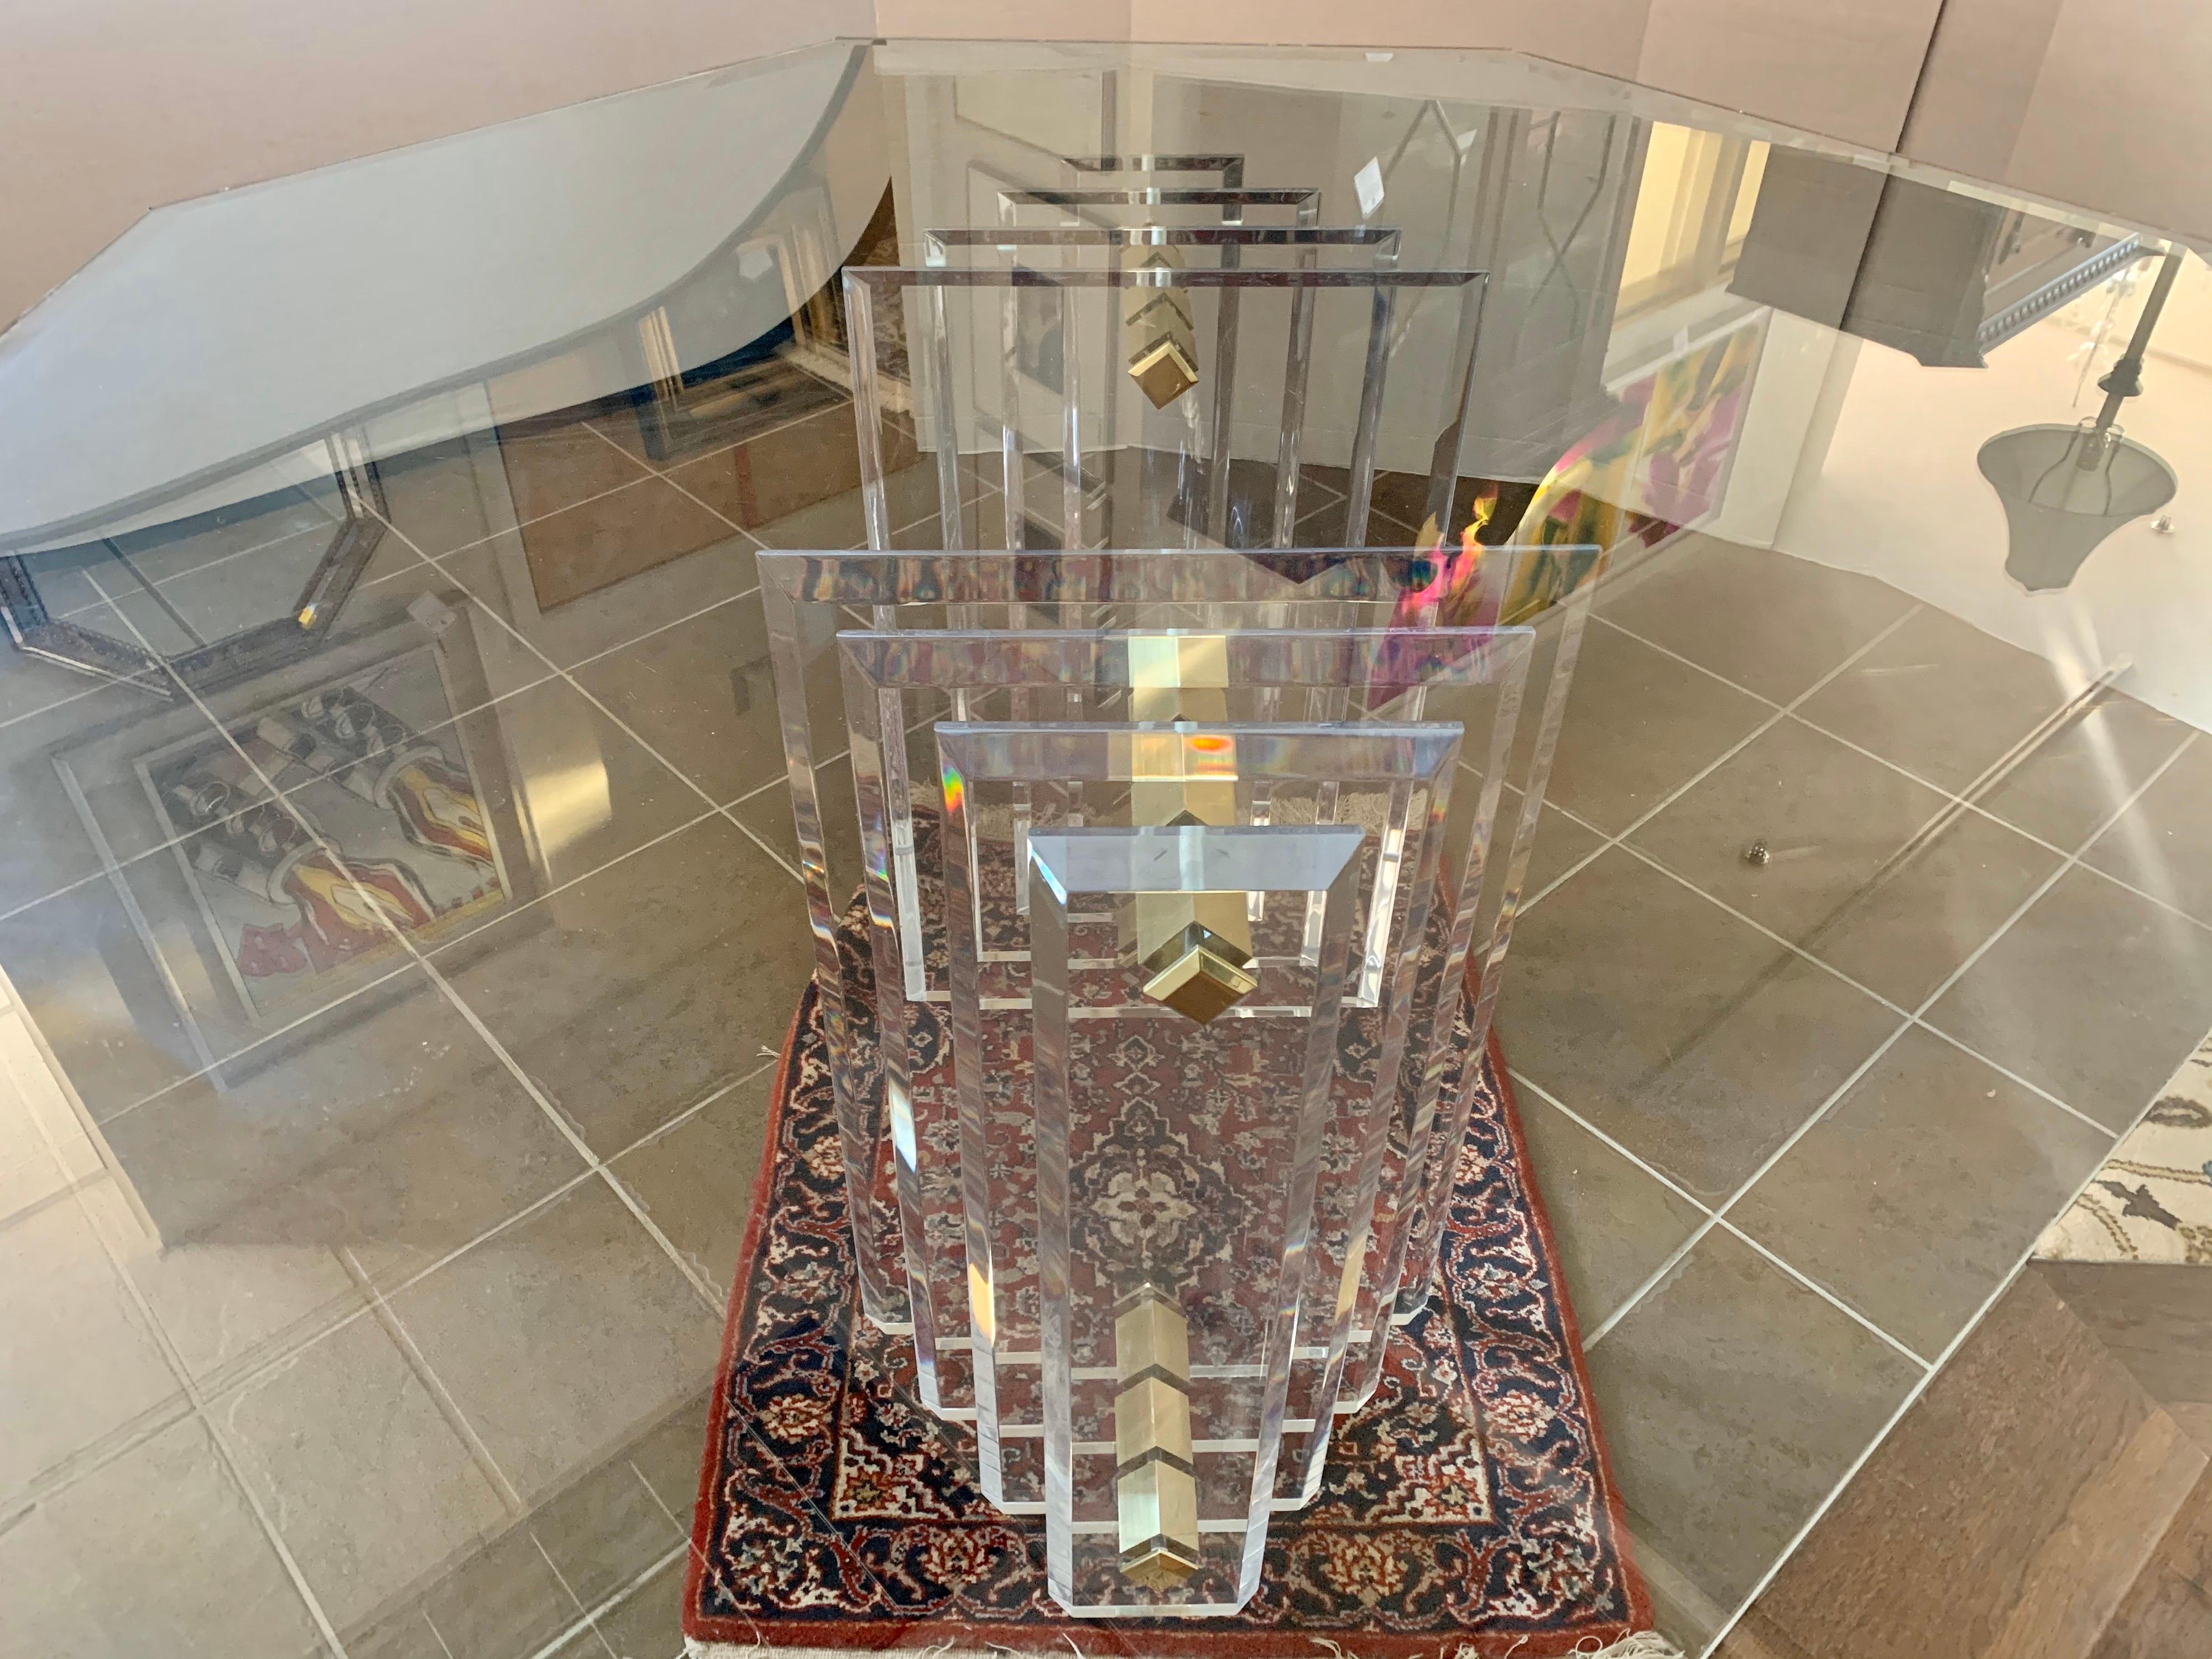 Stunning Charles Hollis Jones Lucite brass and glass eight sided dining table. The skyscraper base is made of lucite and brass and is exquisite.
The base is two separate pieces that support the one half inch thick glass top.
This is a true period